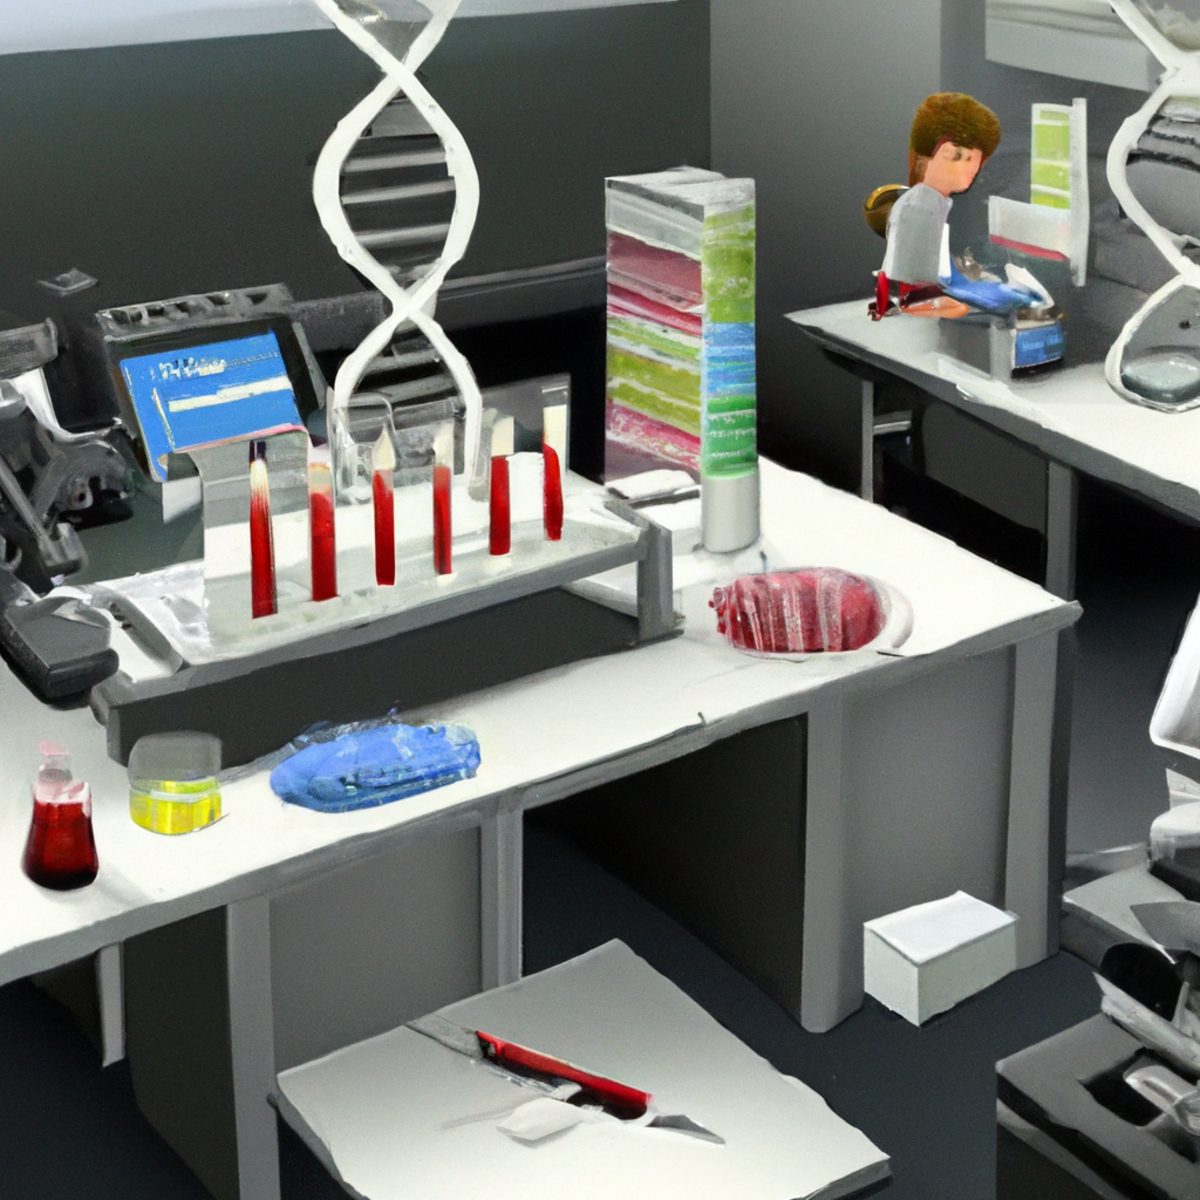 Lab equipment and computer display genetic data analysis, emphasizing meticulous diagnosis and treatment of Cockayne Syndrome.